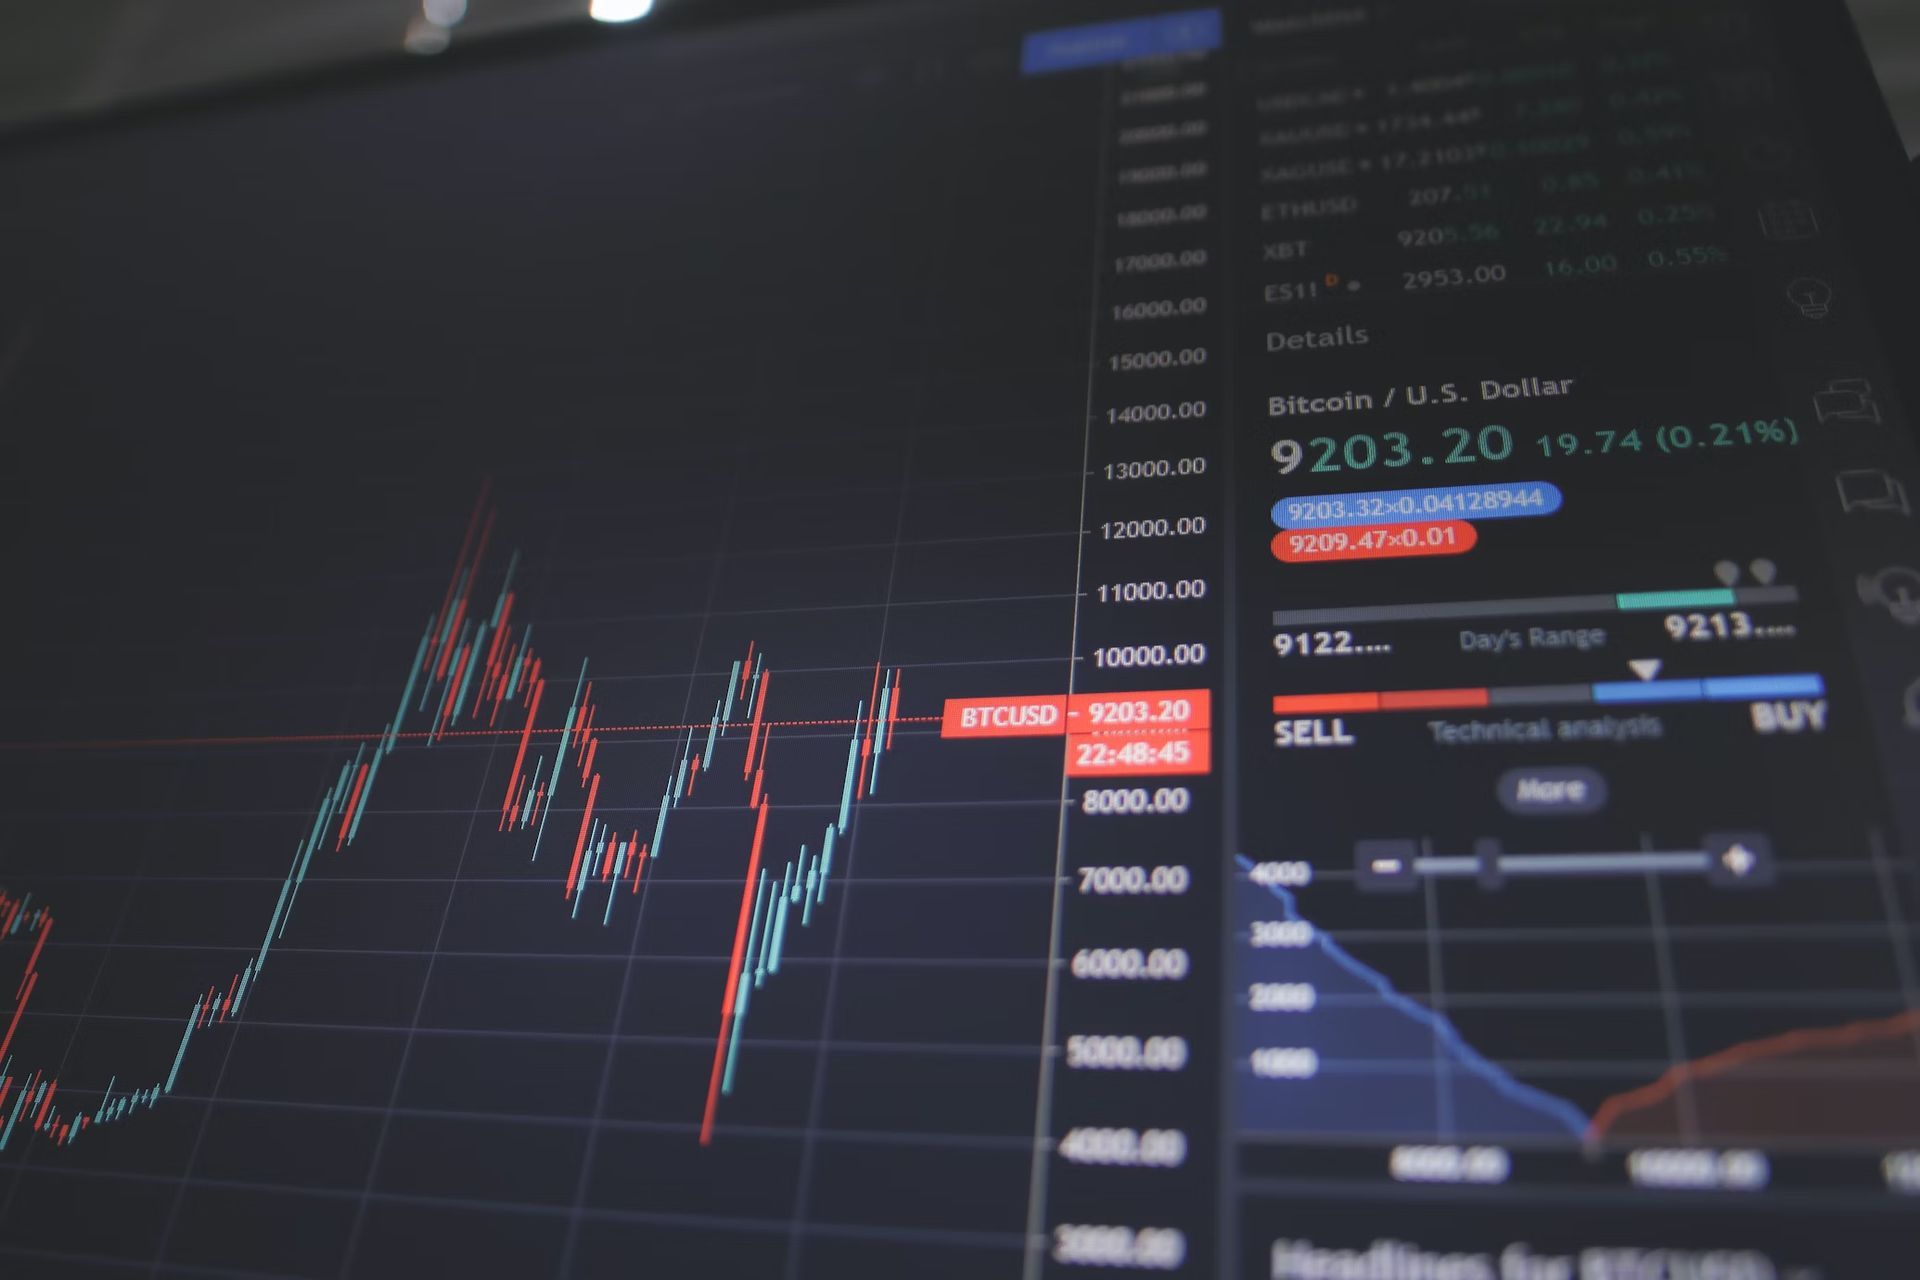 What to consider when choosing a crypto exchange